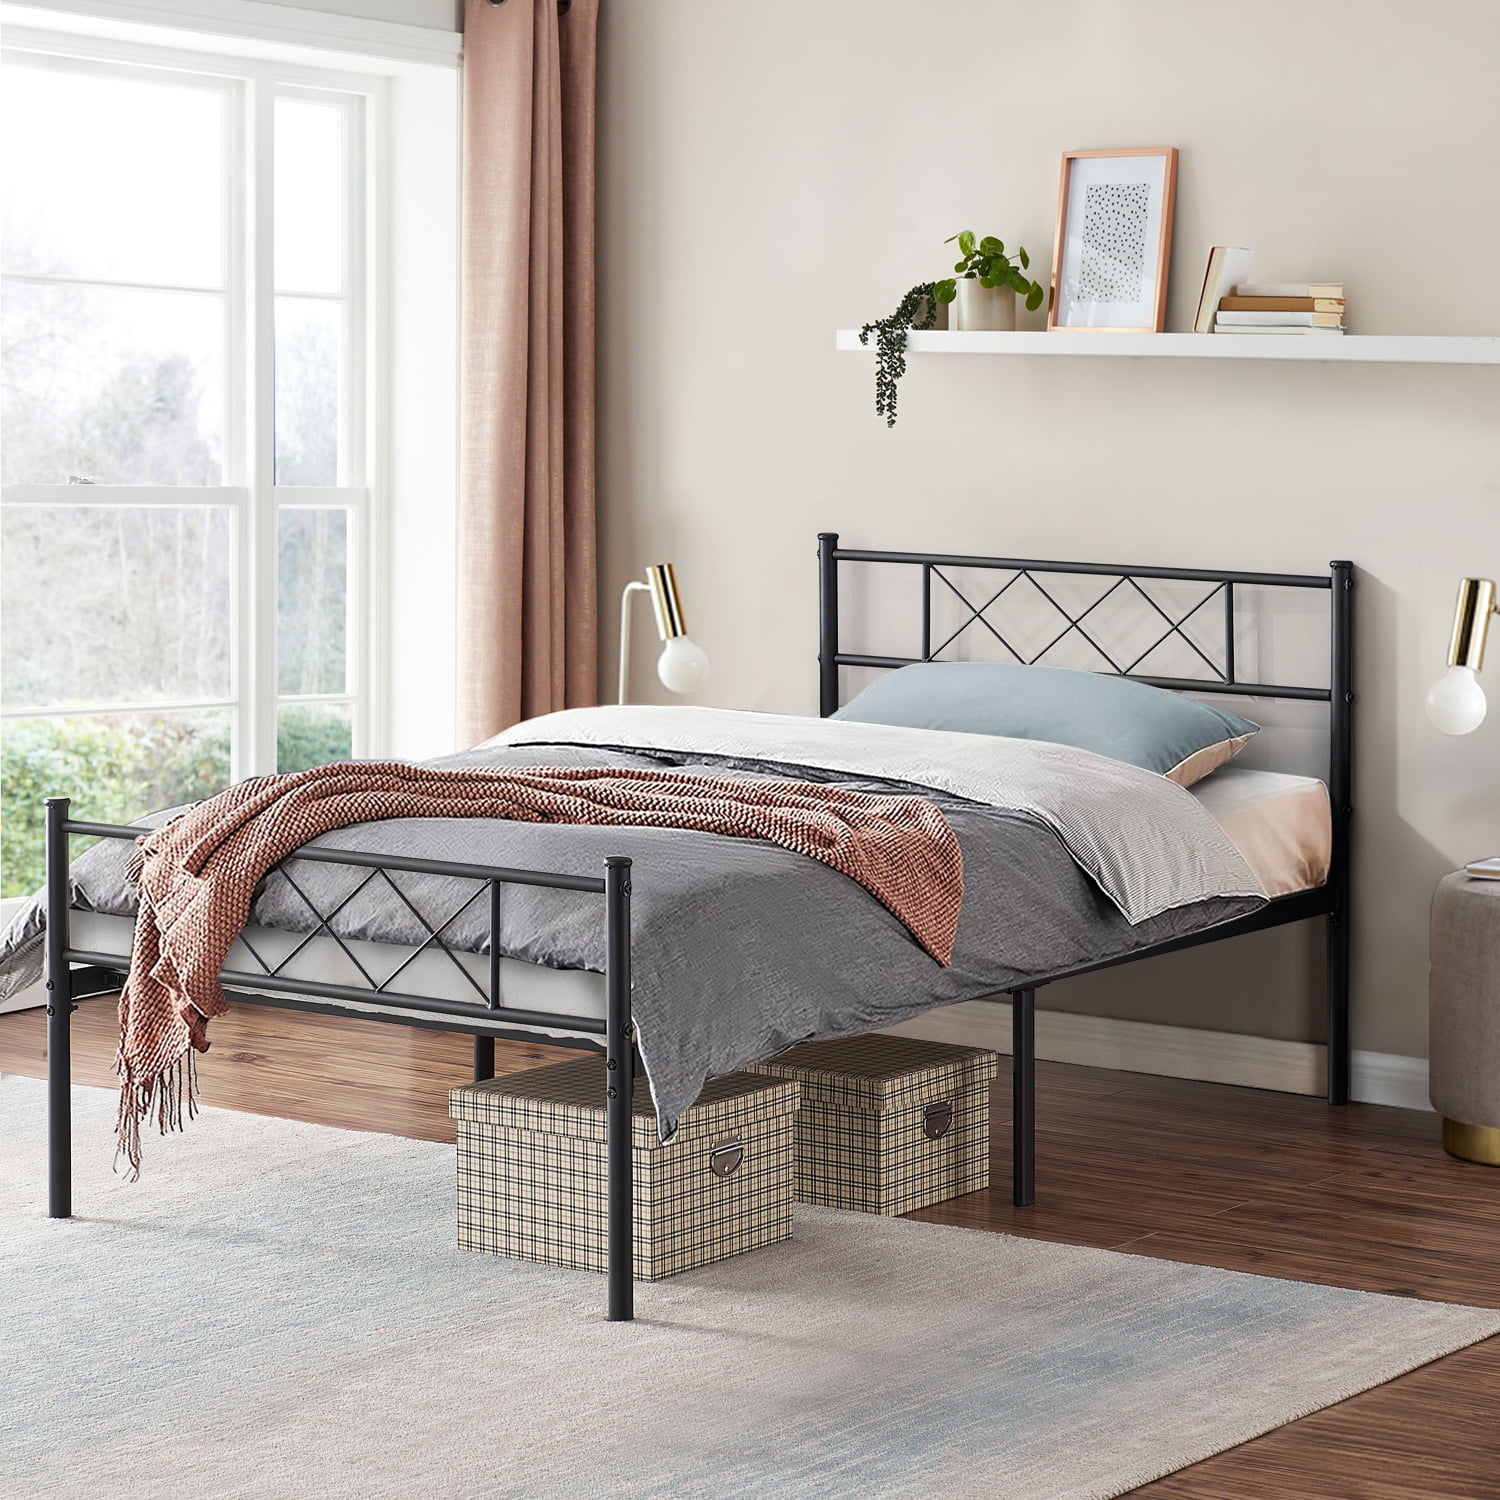 Twin Size Metal Platform Bed Frame With, Twin Platform Metal Bed Frame With Headboard And Footboard Mattress Foundation